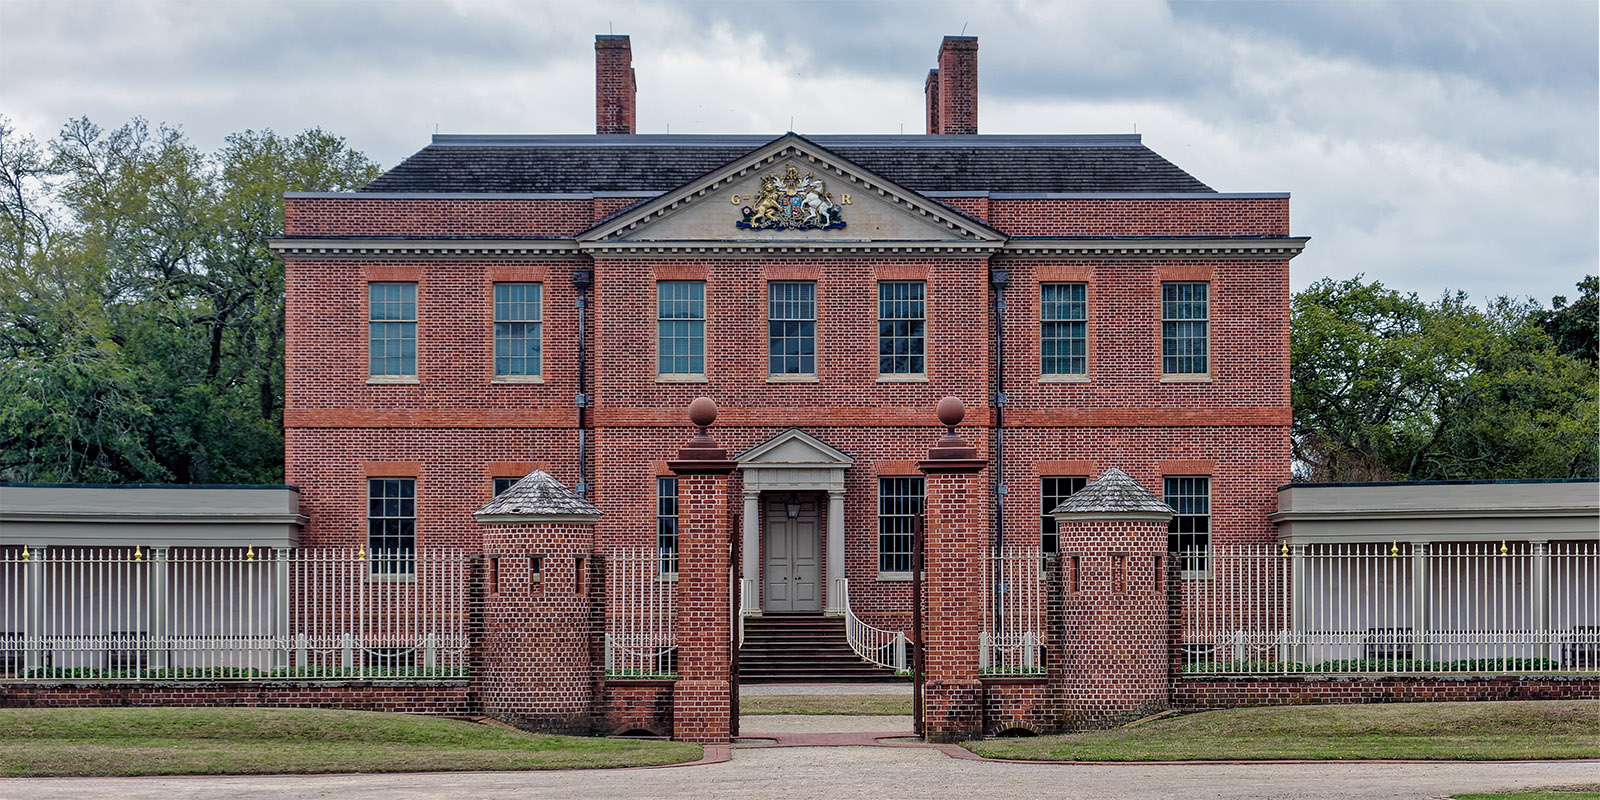 Tryon Palace, headquarters of the British governors of North Carolina from 1770 to 1775